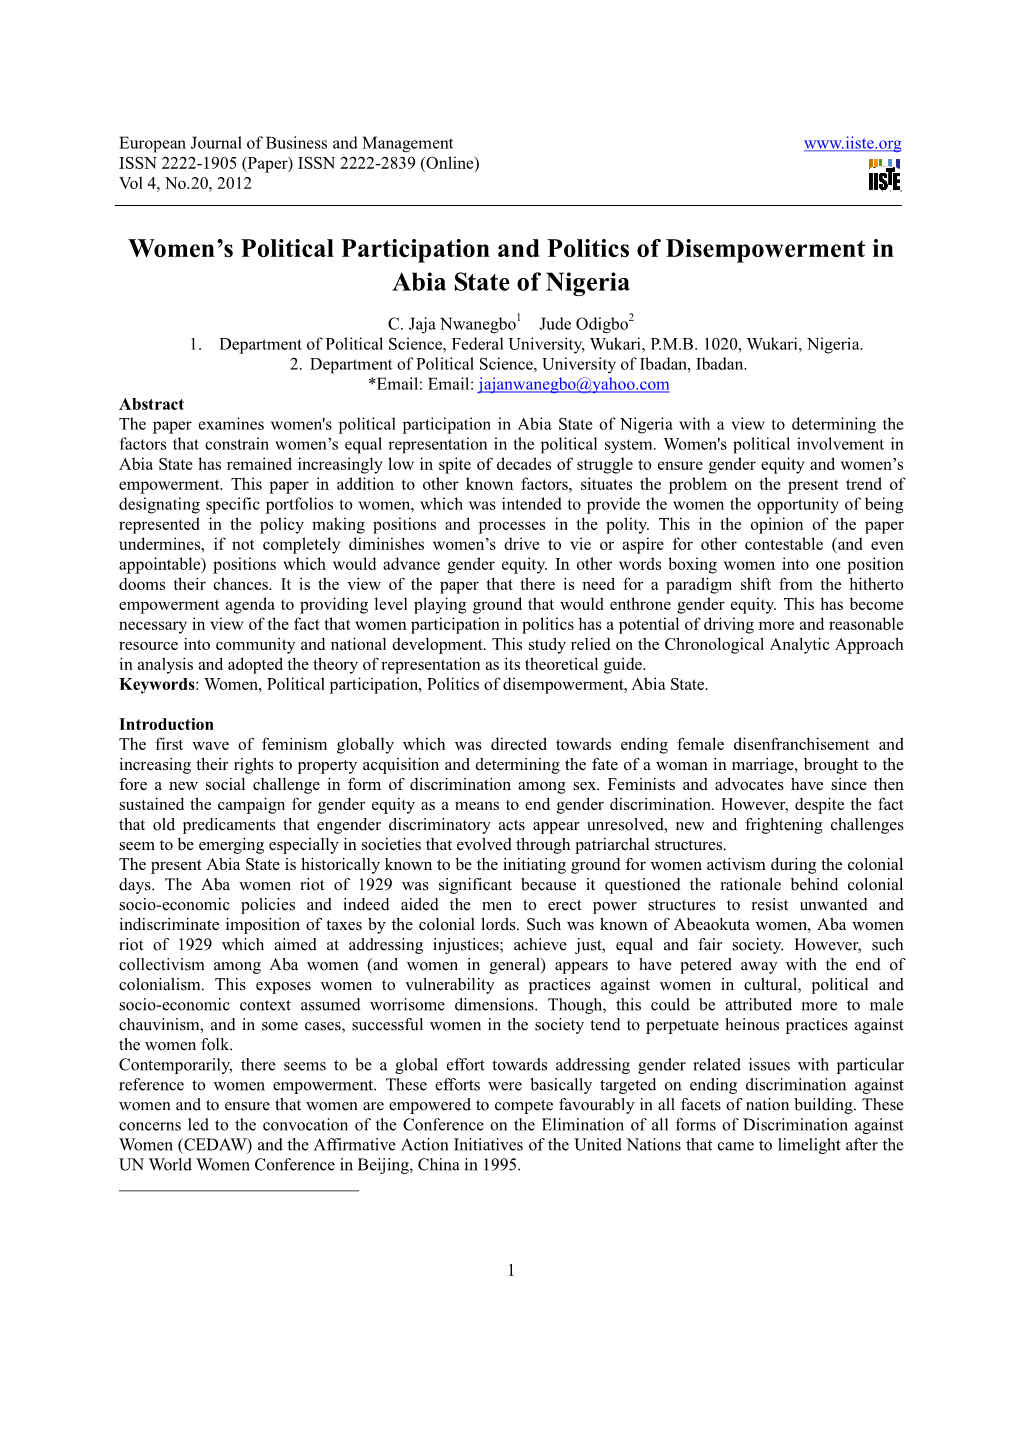 Women's Political Participation and Politics of Disempowerment in Abia